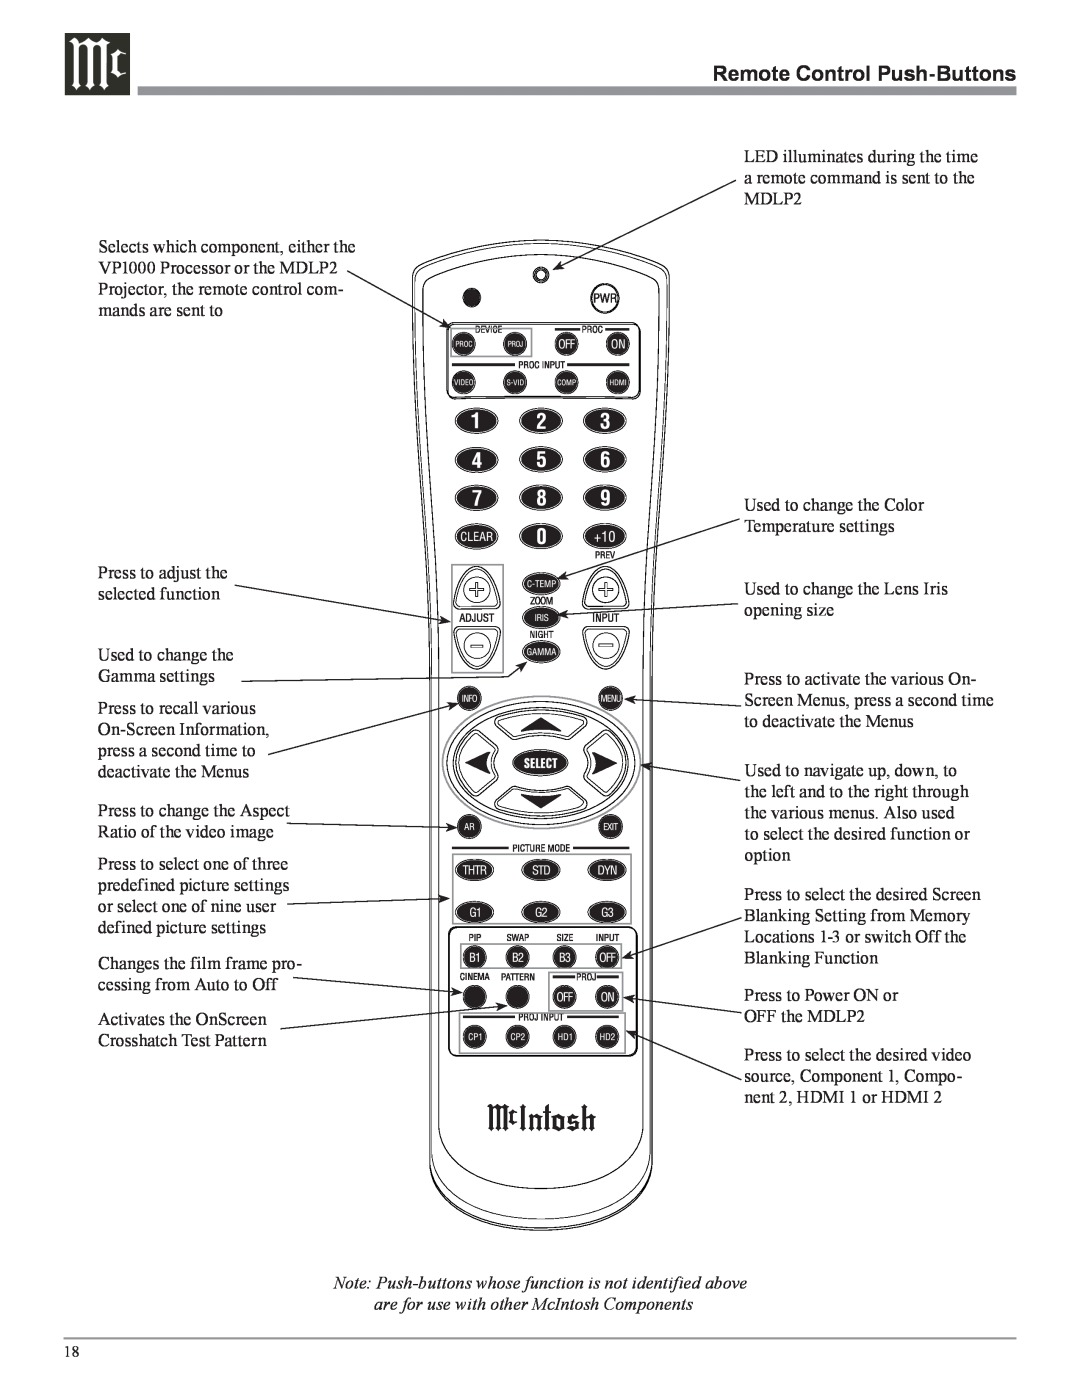 McIntosh MDLP2 owner manual Remote Control Push-Buttons 